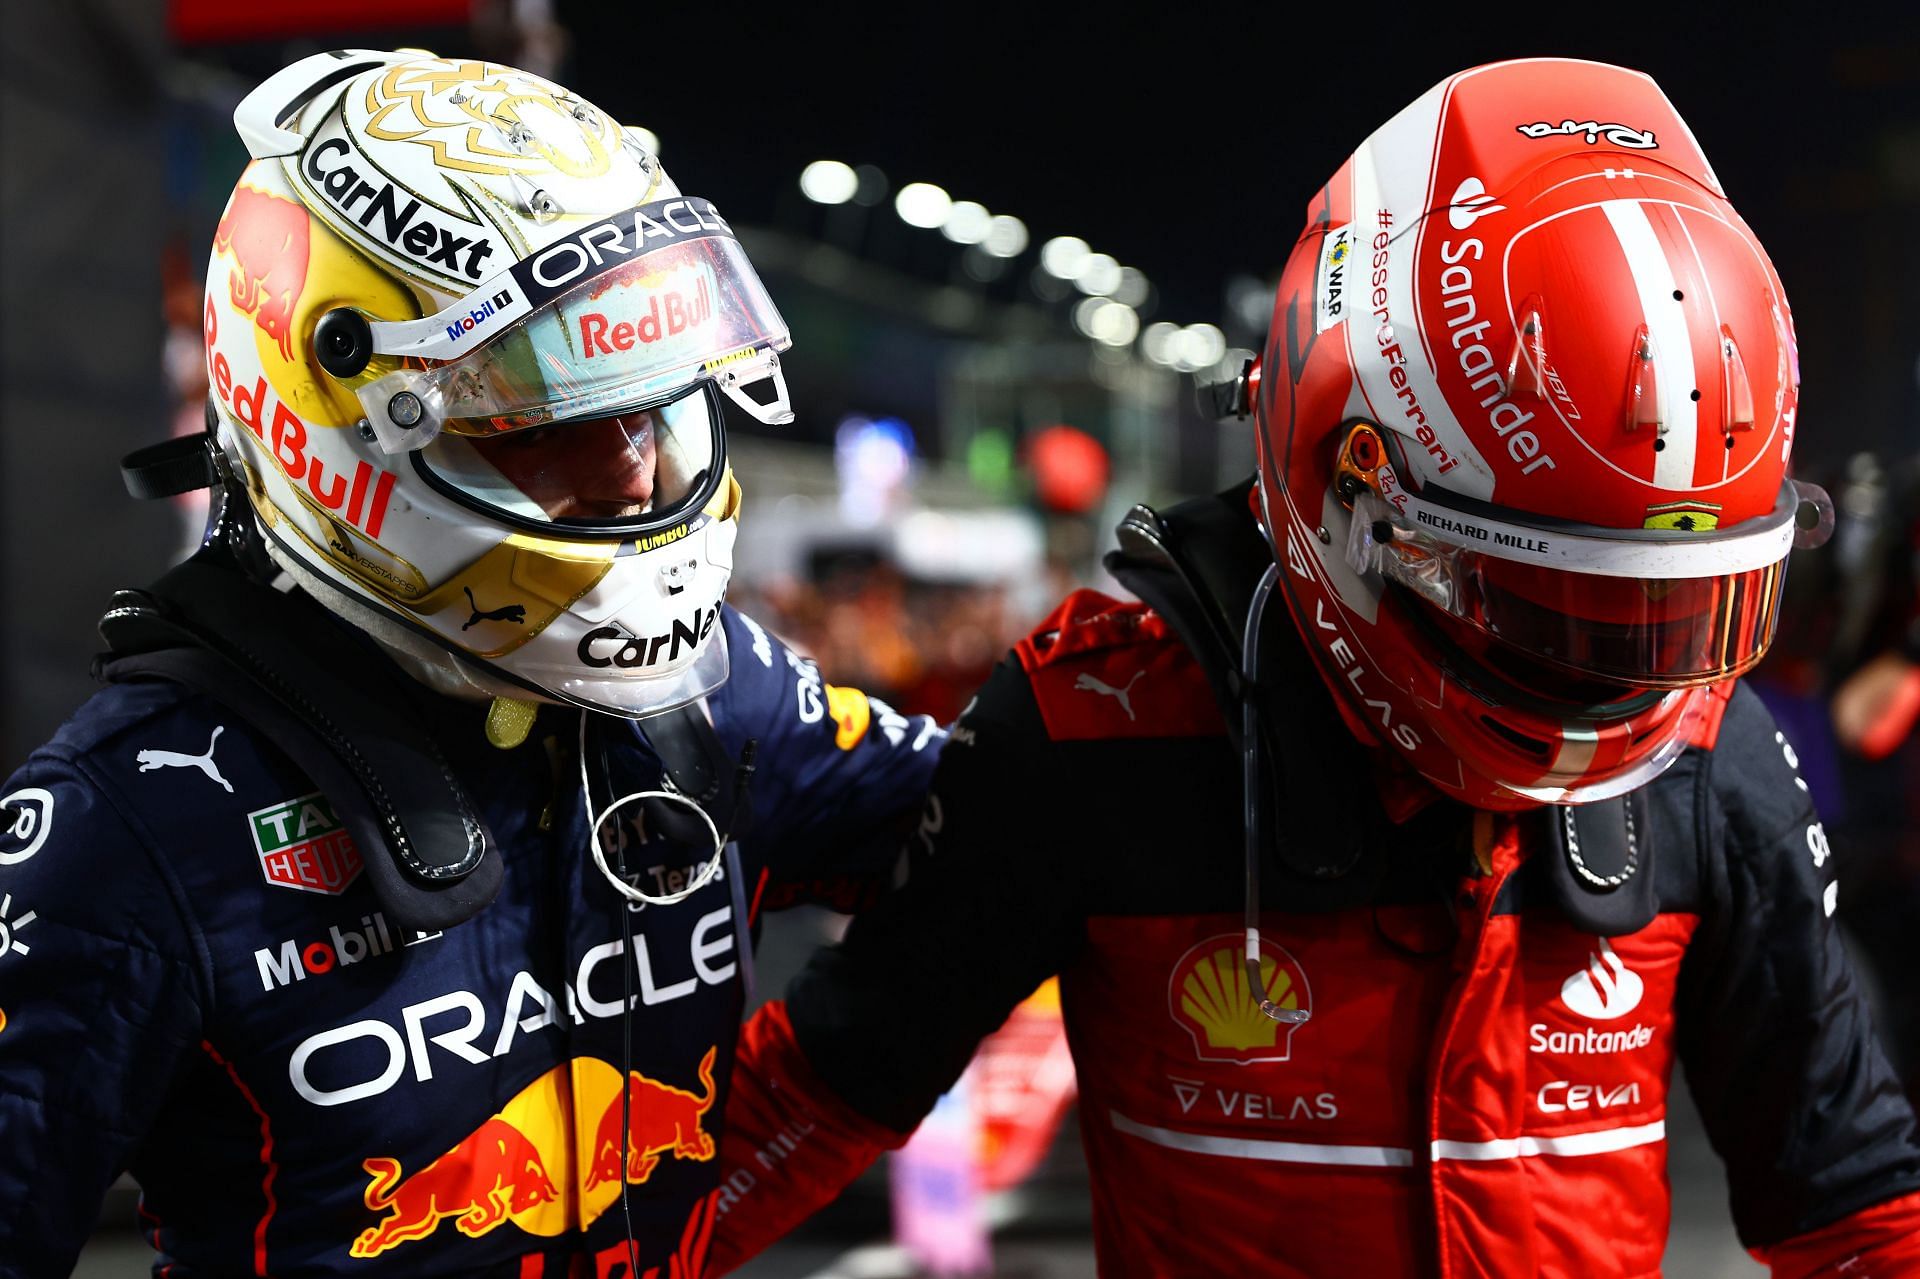 F1 Grand Prix of Saudi Arabia - The two drivers showed immense respect for each other after the race.